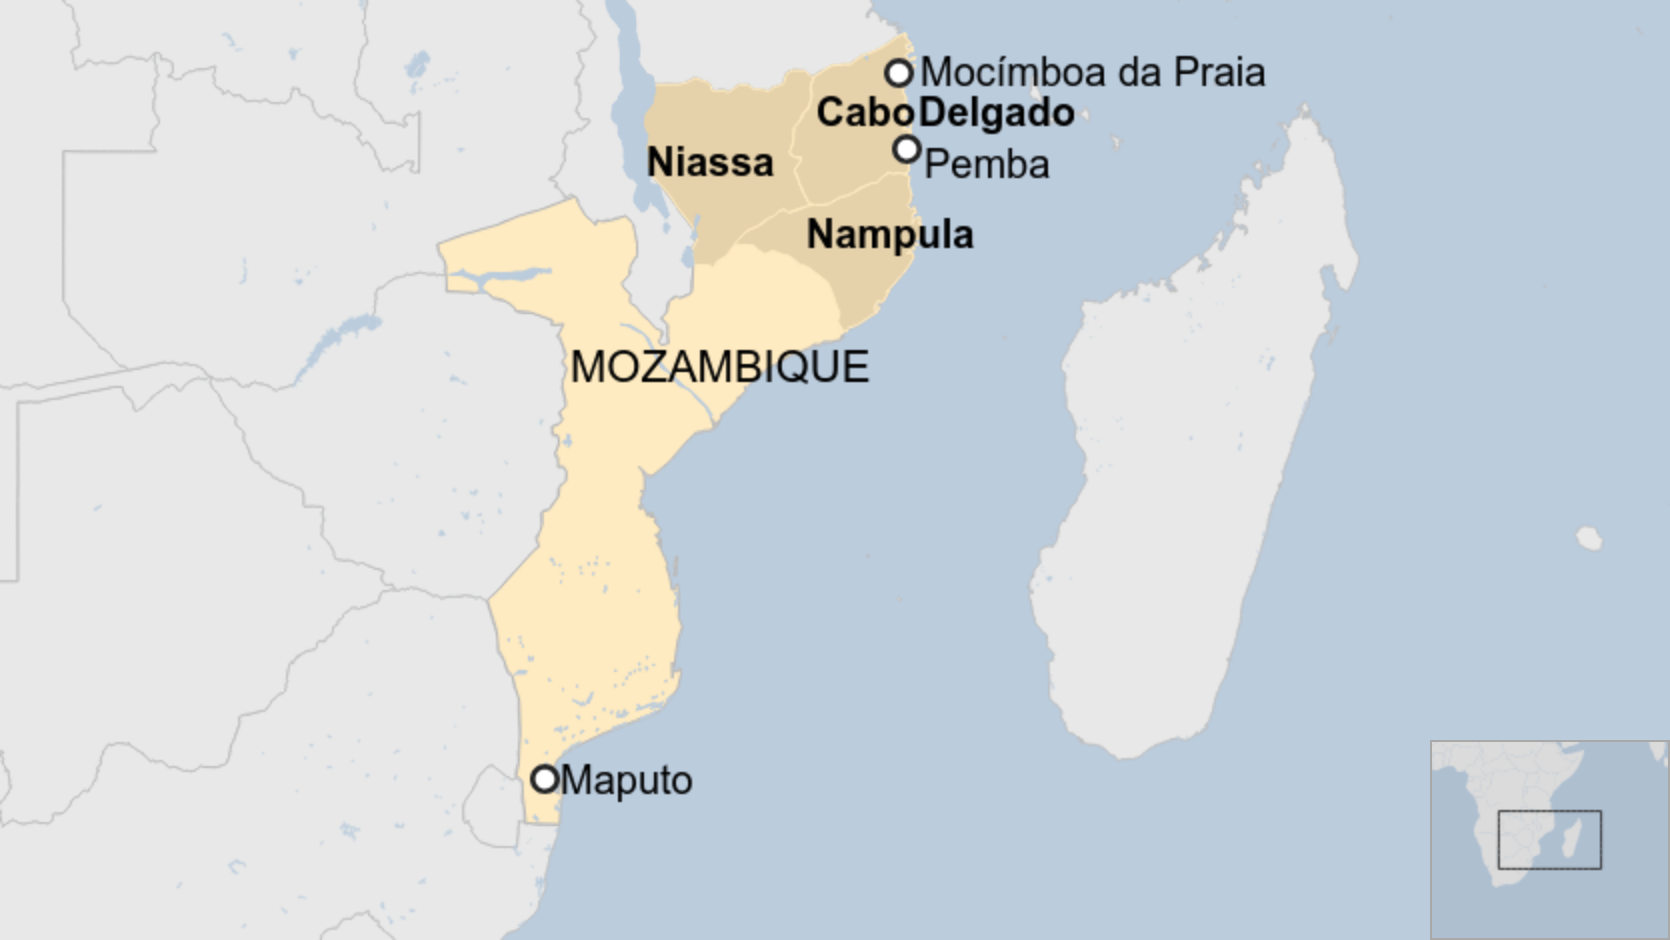 Map of Mozambique showing northern provinces